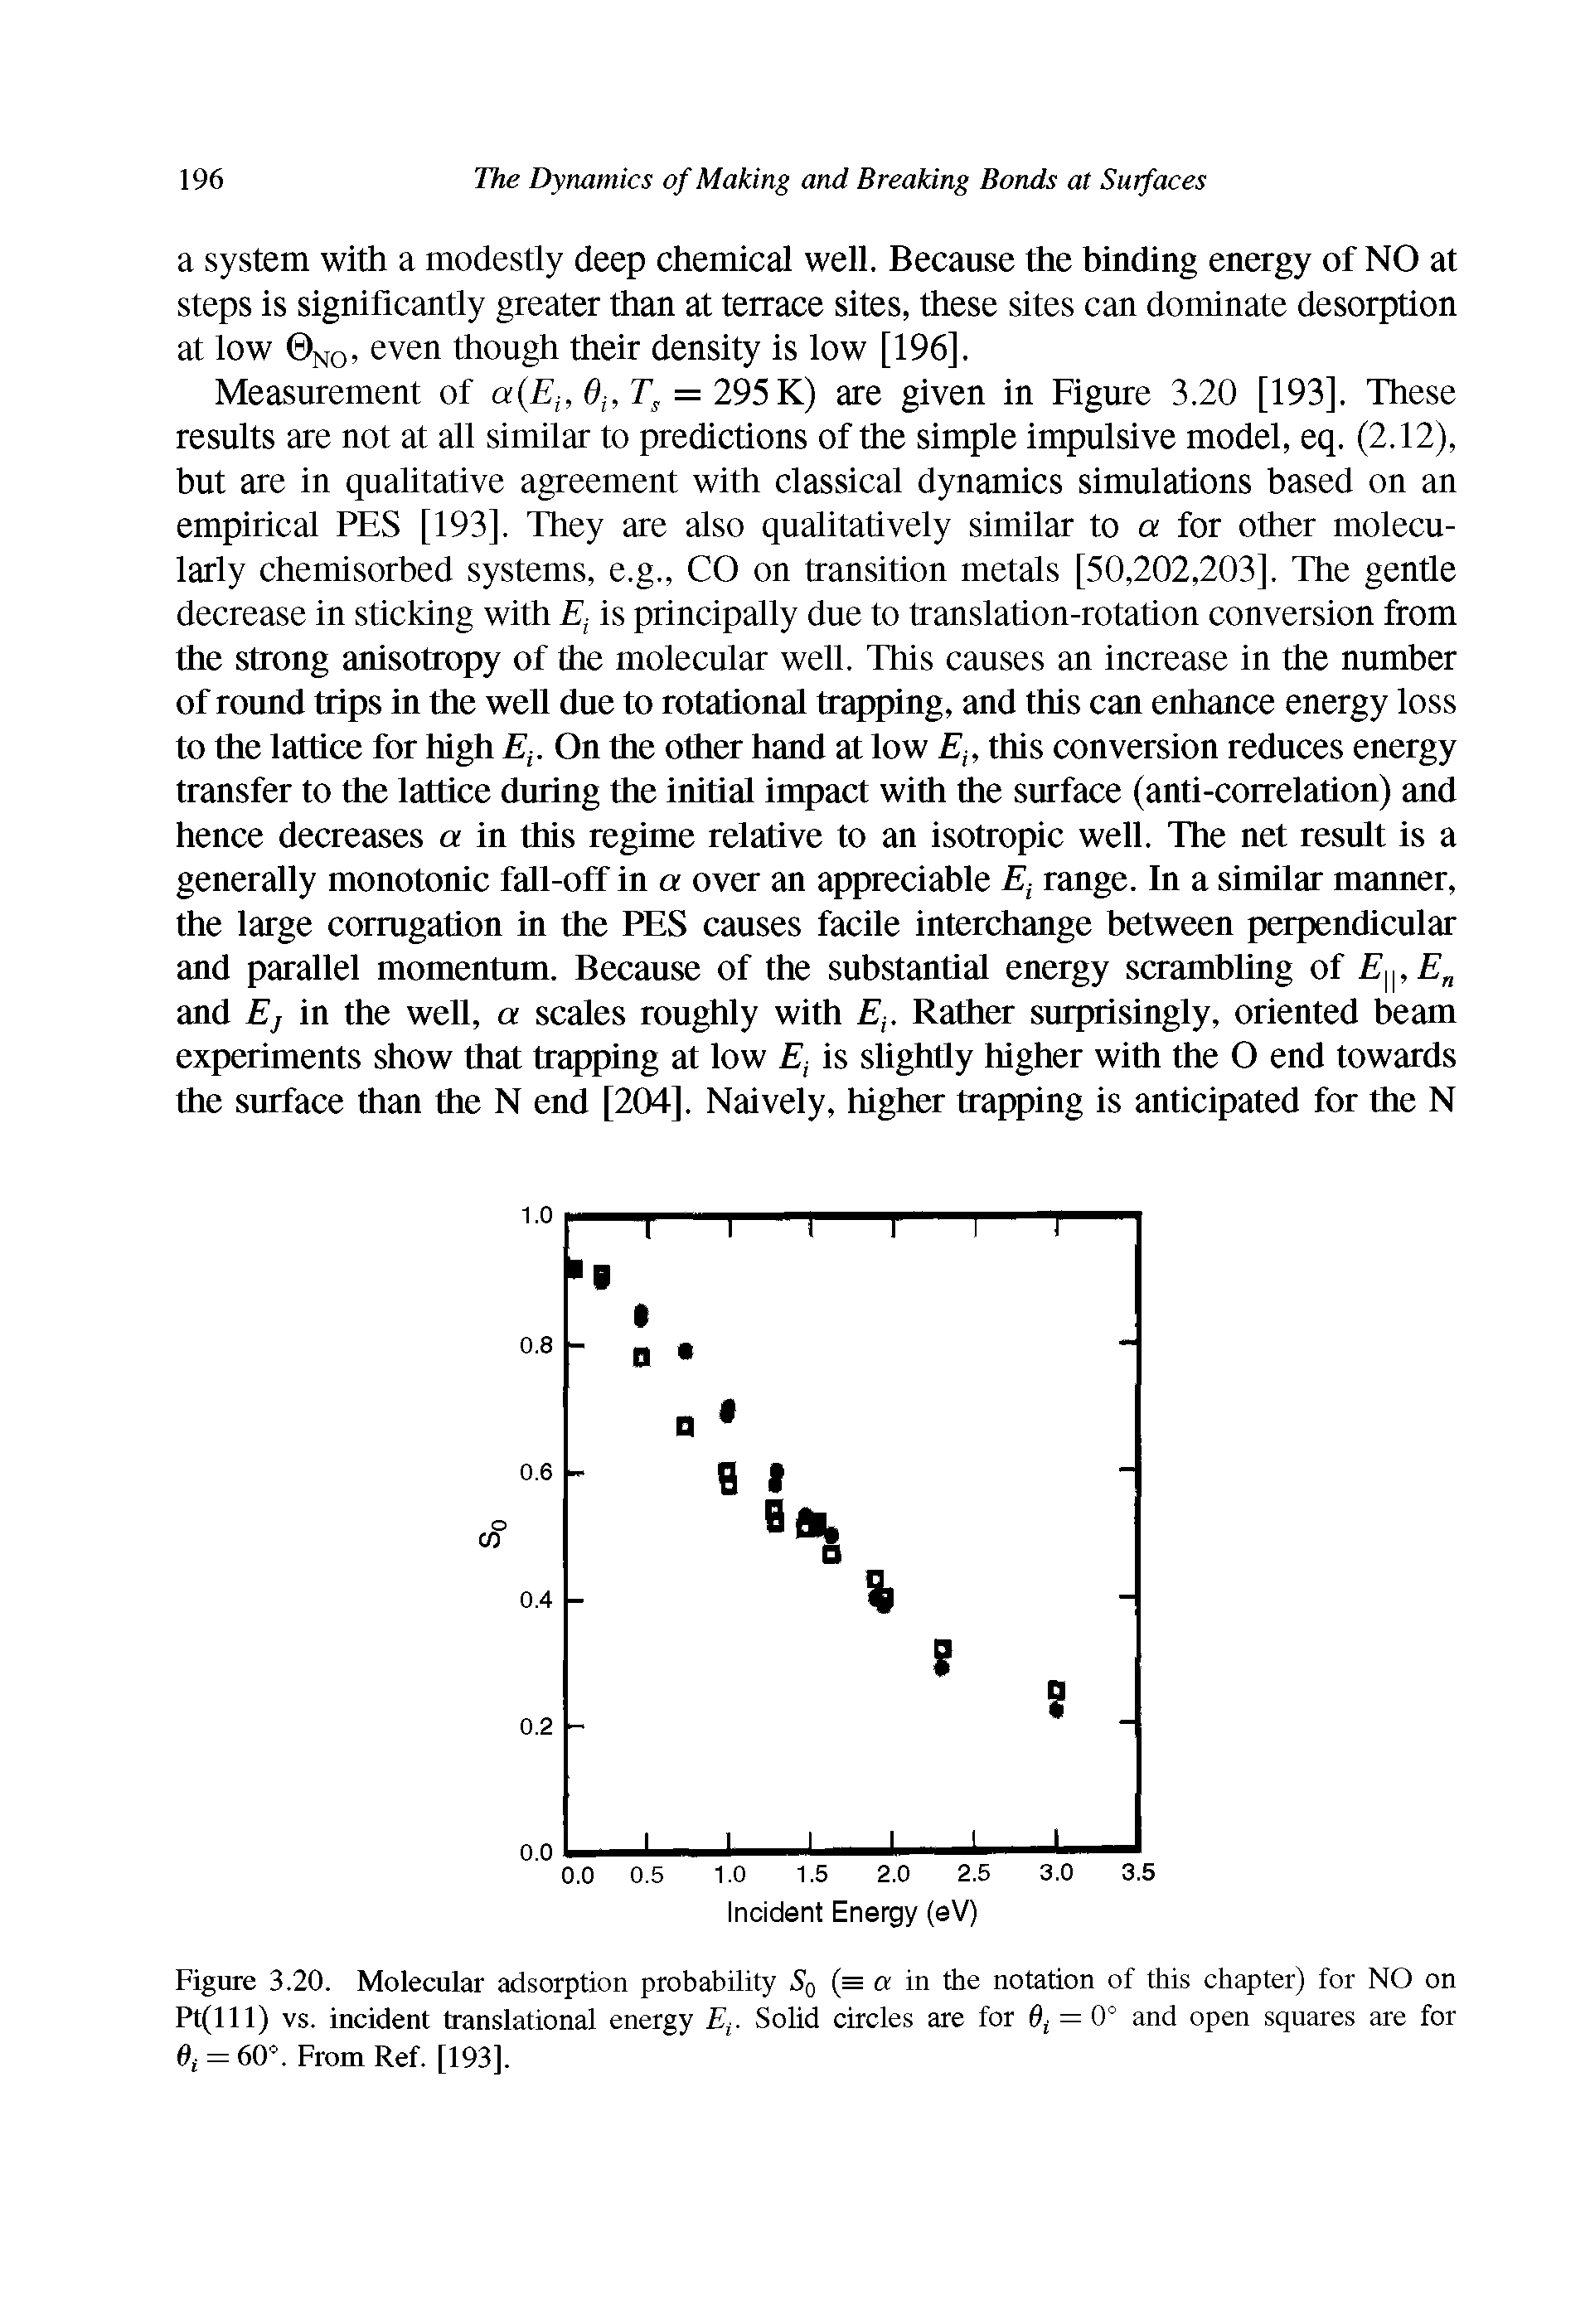 Figure 3.20. Molecular adsorption probability S0 (= a in the notation of this chapter) for NO on Pt(l 11) vs. incident translational energy ,. Solid circles are for 0, = 0° and open squares are for , = 60°. From Ref. [193].